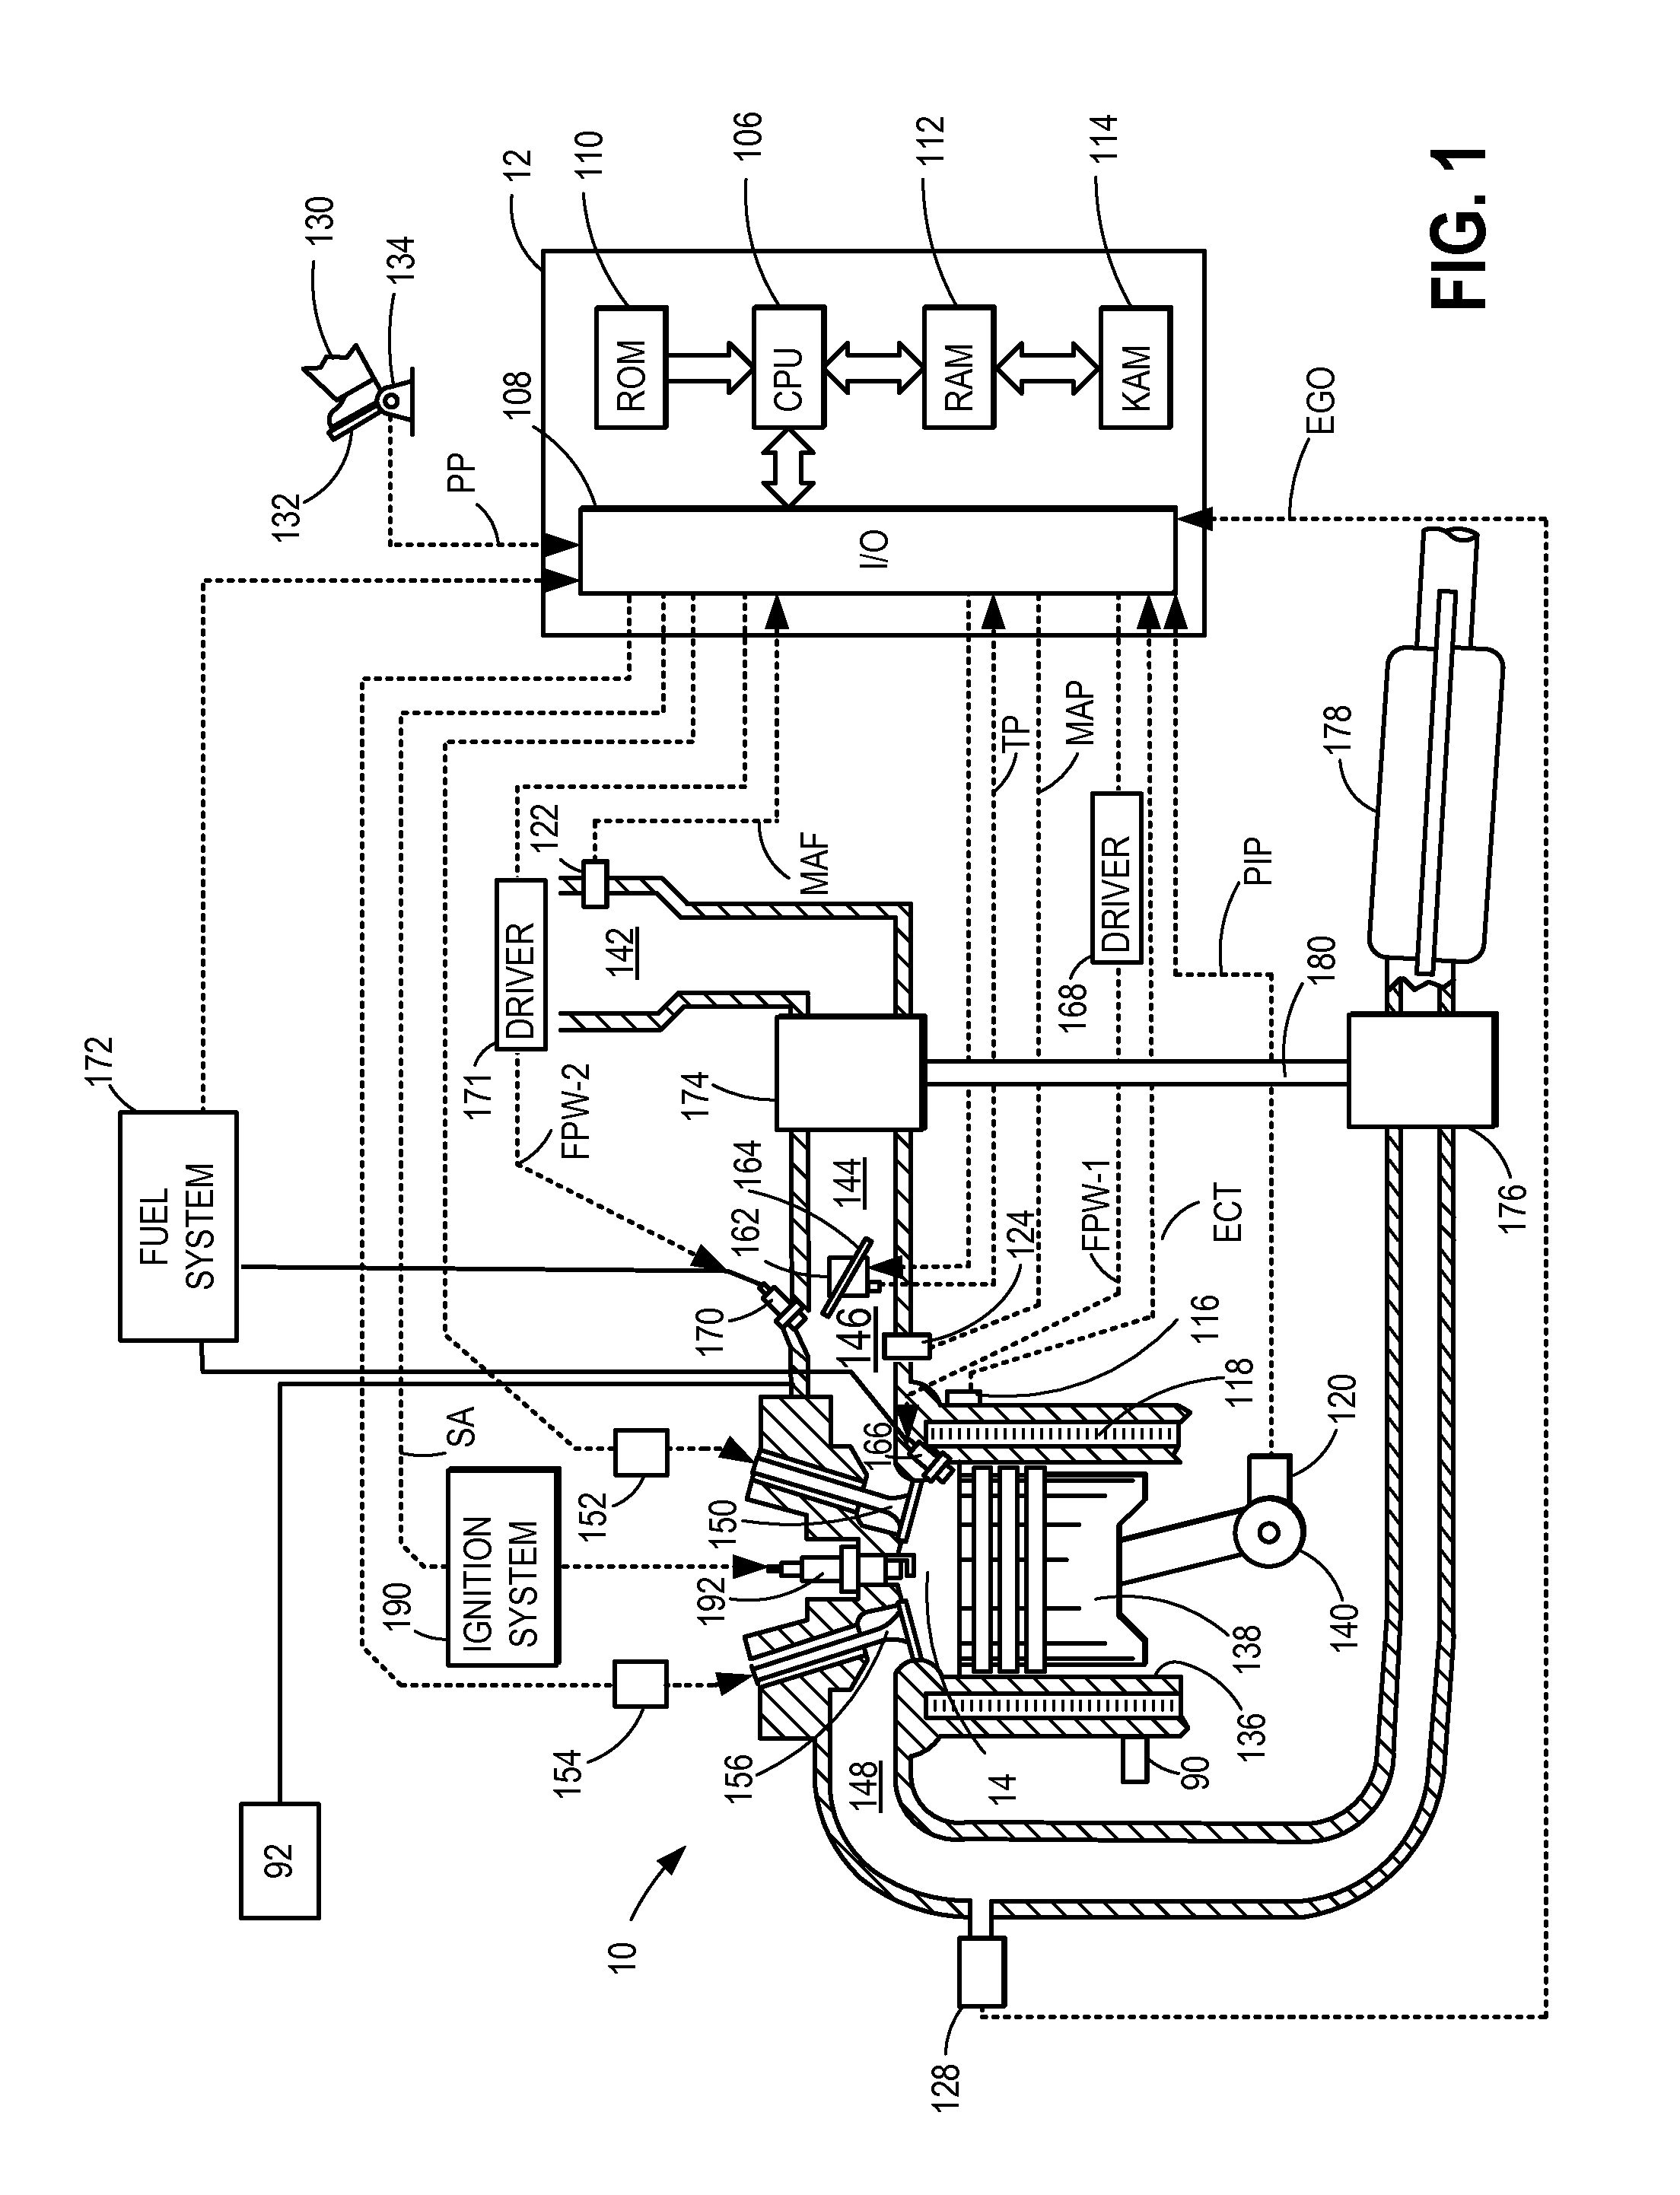 Method and system for vacuum control